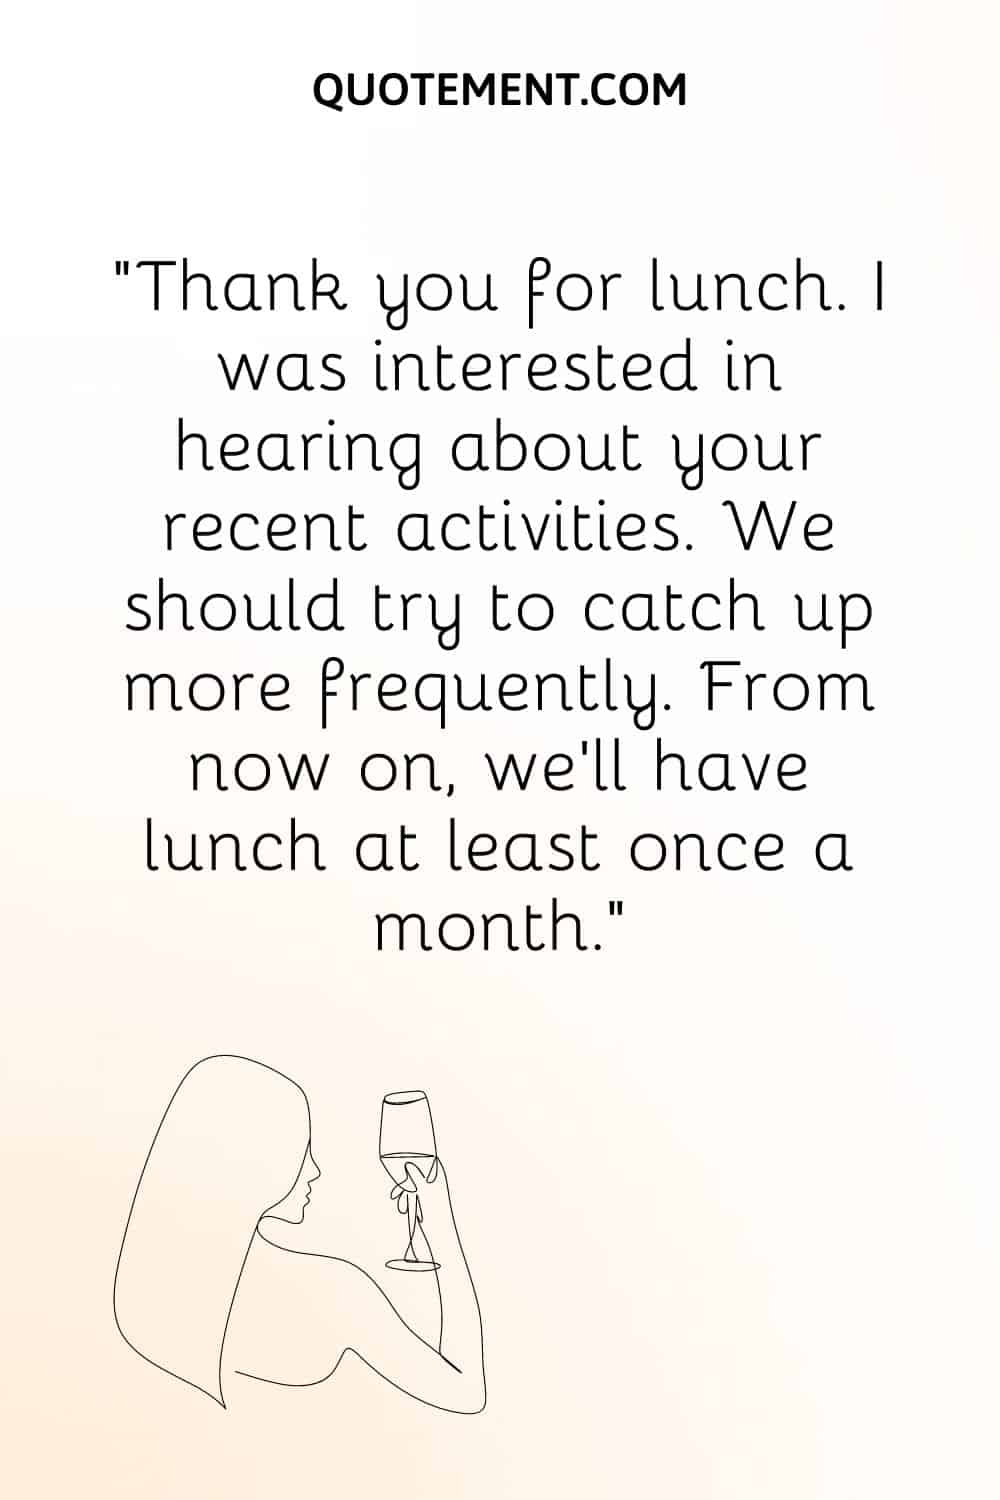 Thank you for lunch. I was interested in hearing about your recent activities